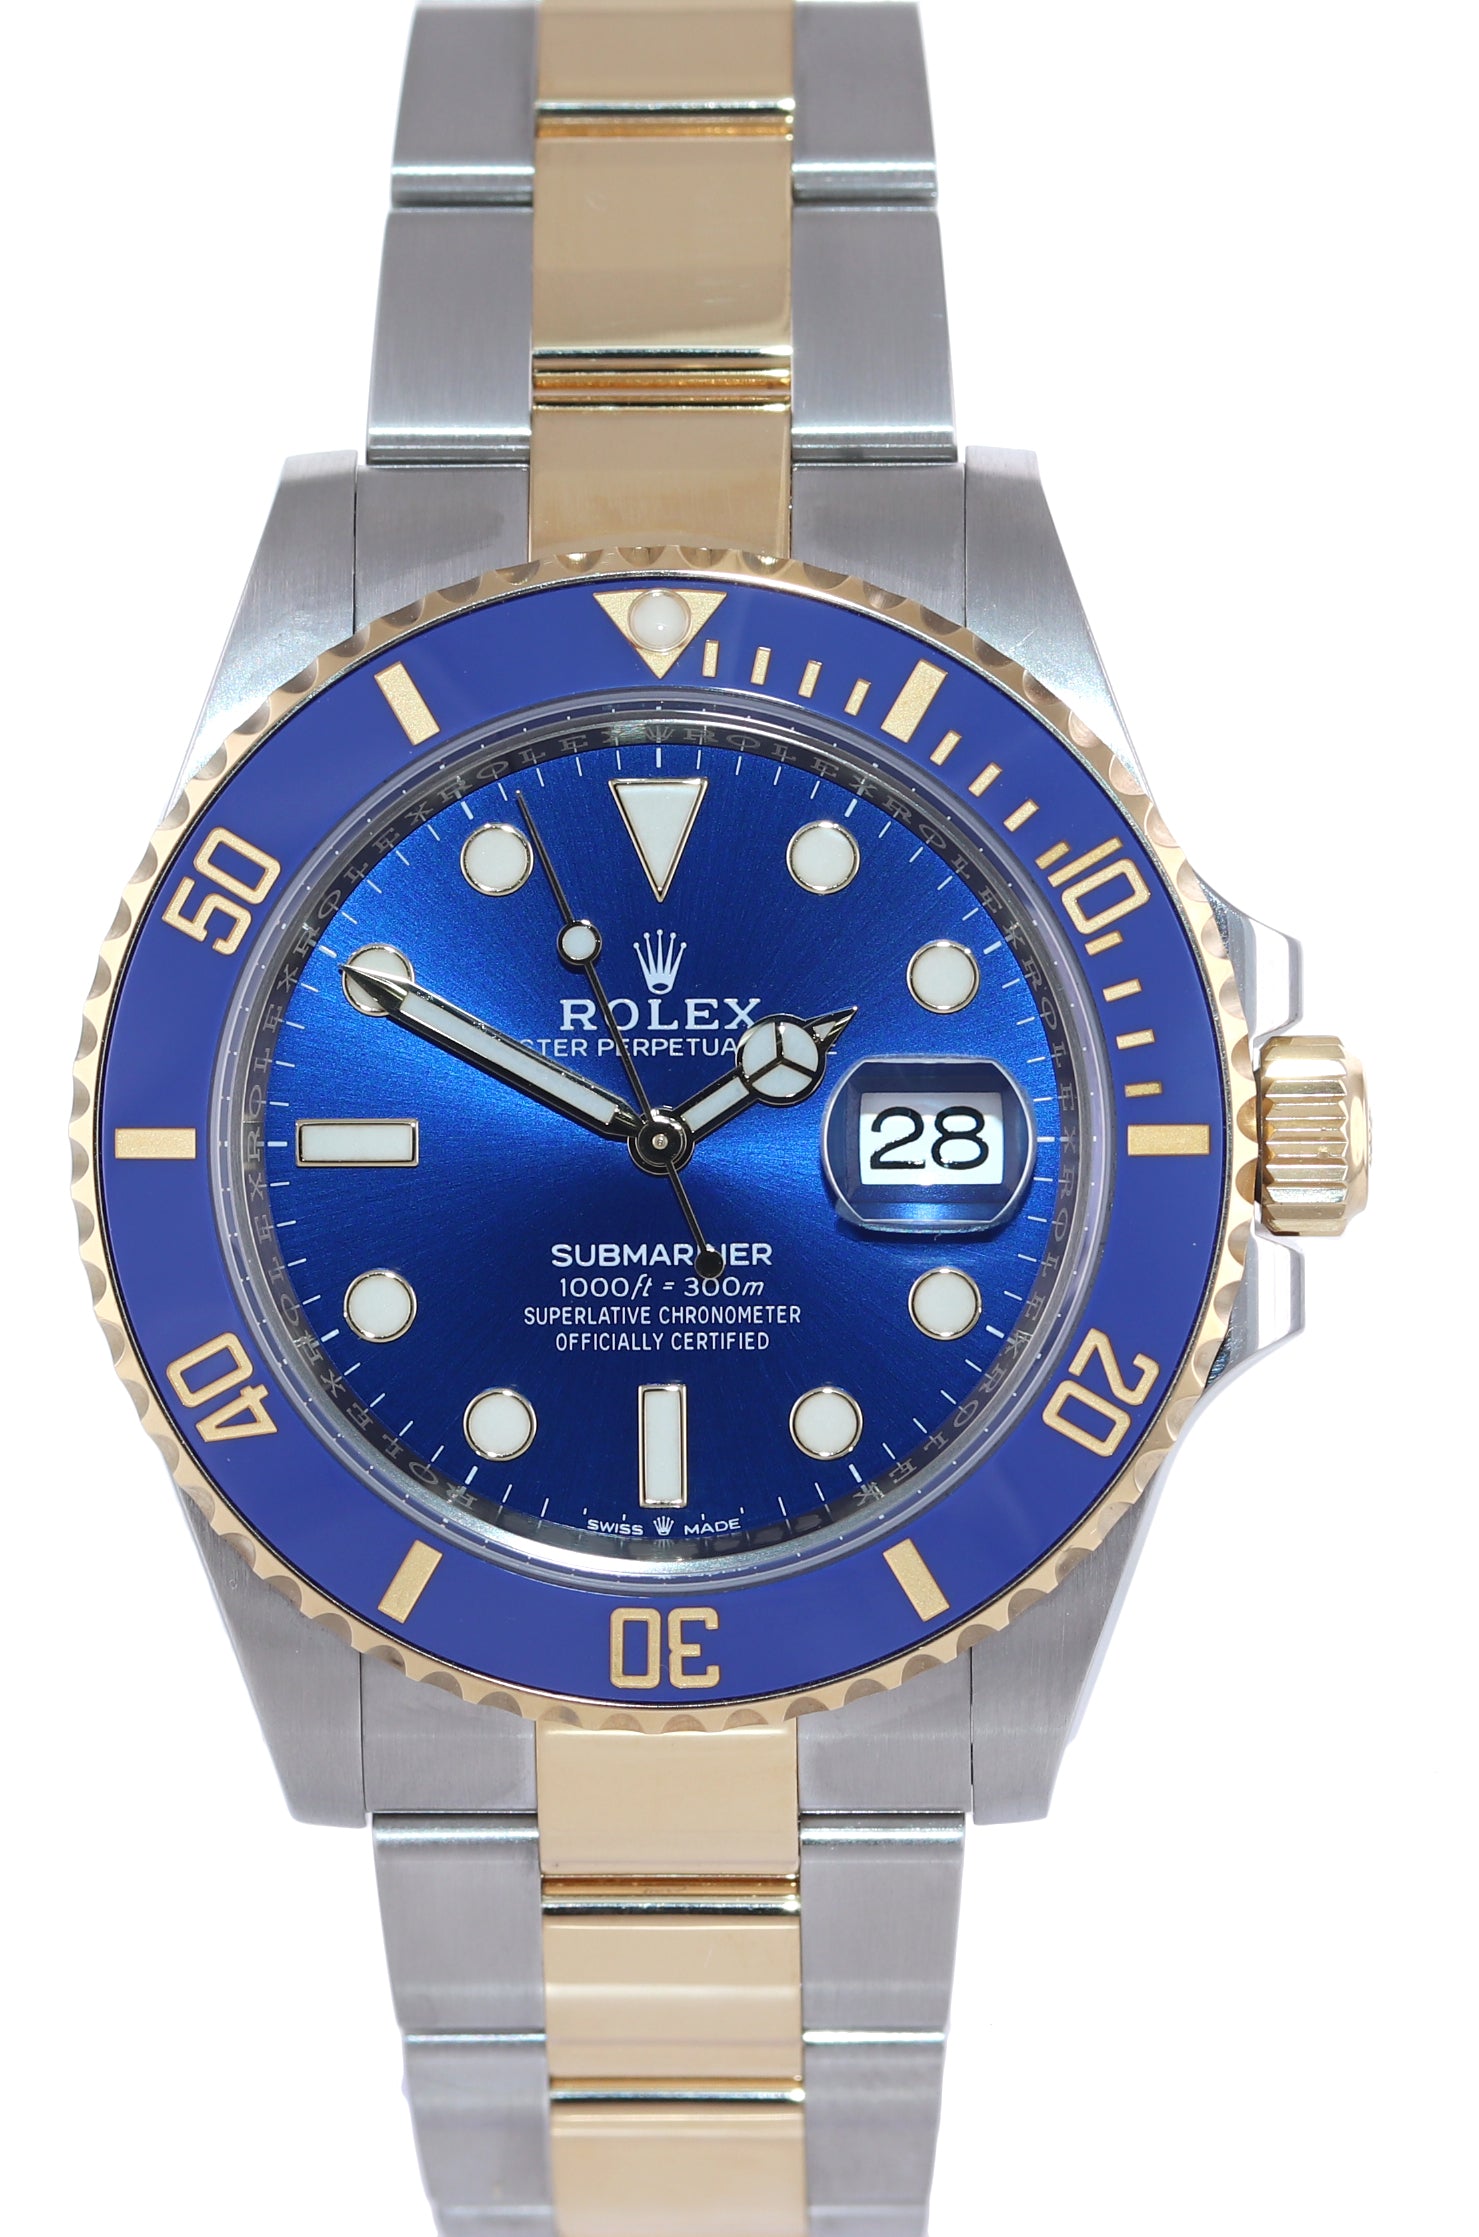 NEW APRIL 2022 PAPERS Rolex Submariner 41mm Blue 126613LB Two Tone Gold Watch